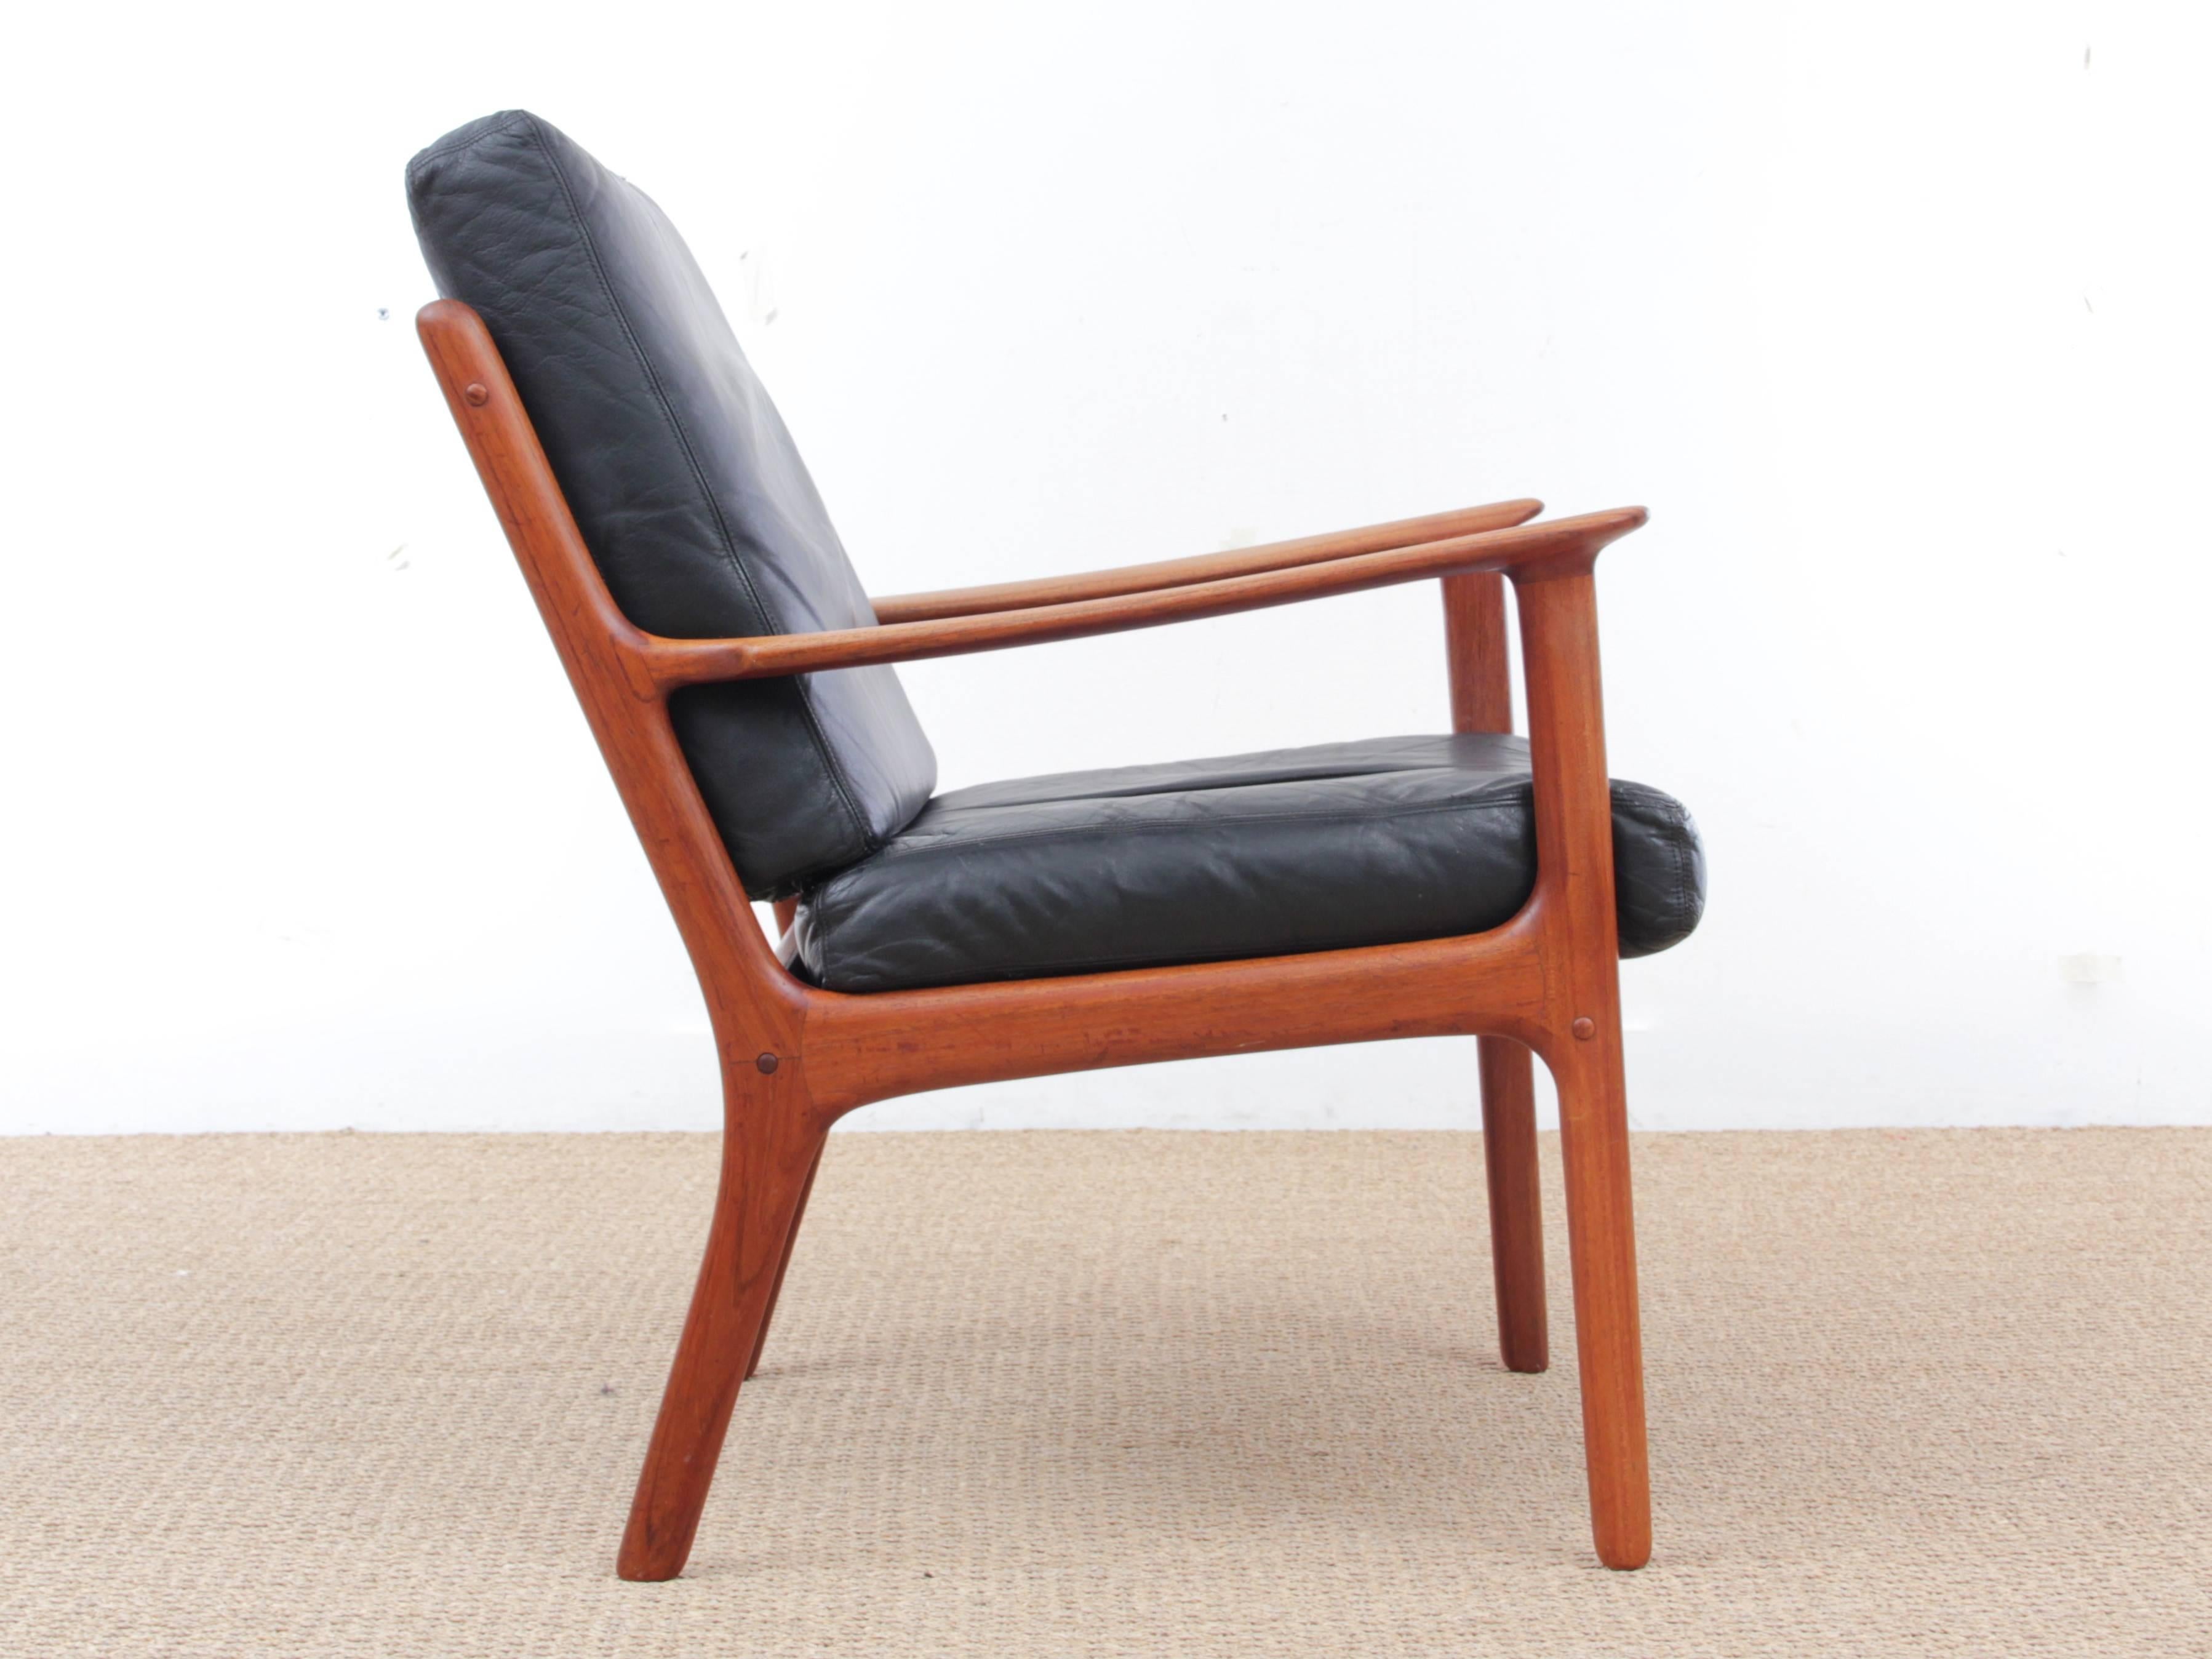 Mid-20th Century Danish Mid-Century Modern Pair of Armchairs by Ole Wanscher for Paul Jepesen